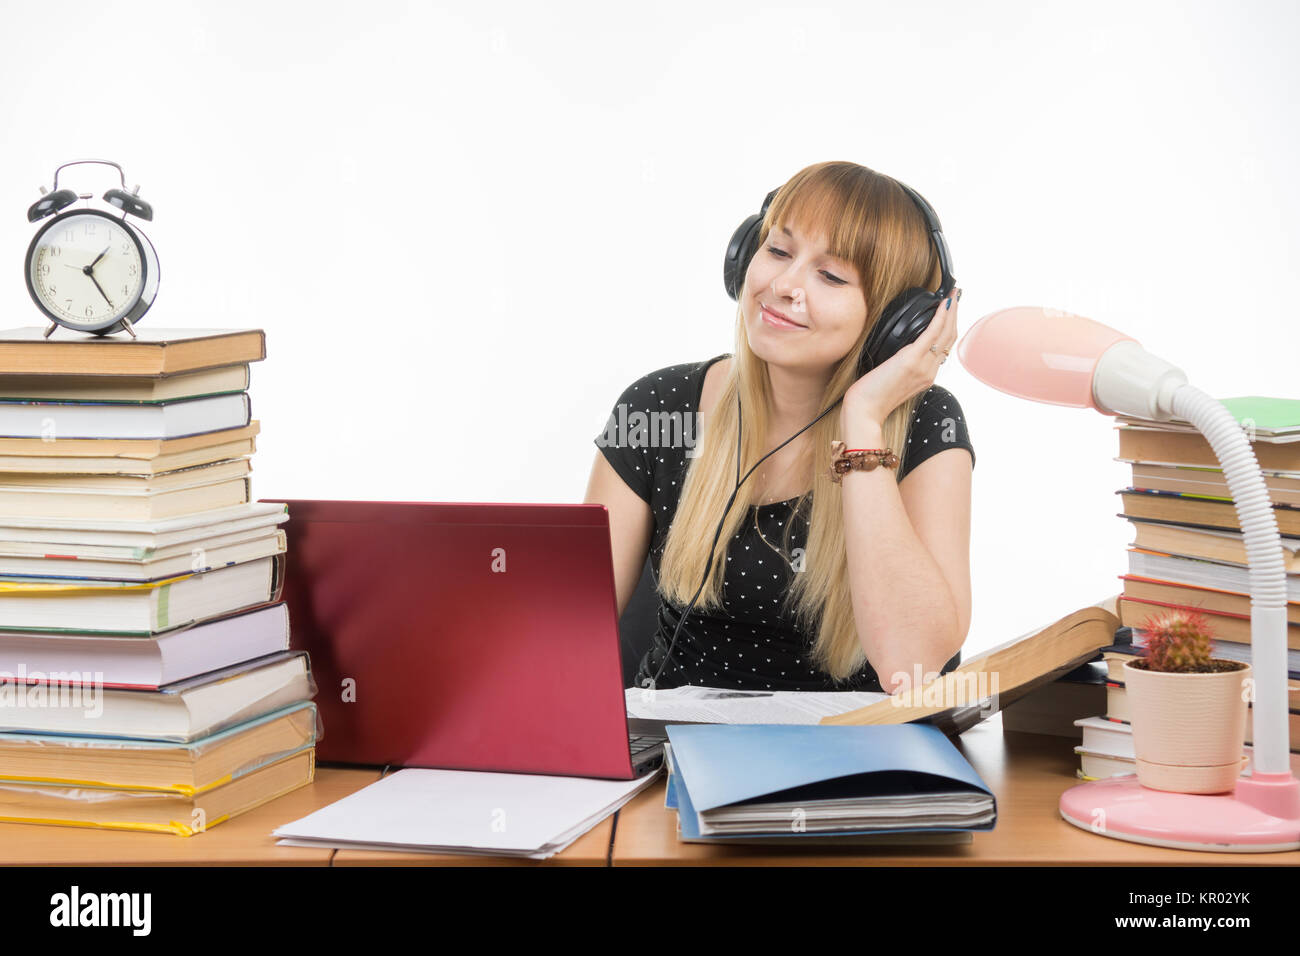 After hearing the student an interesting music on headphones Stock Photo